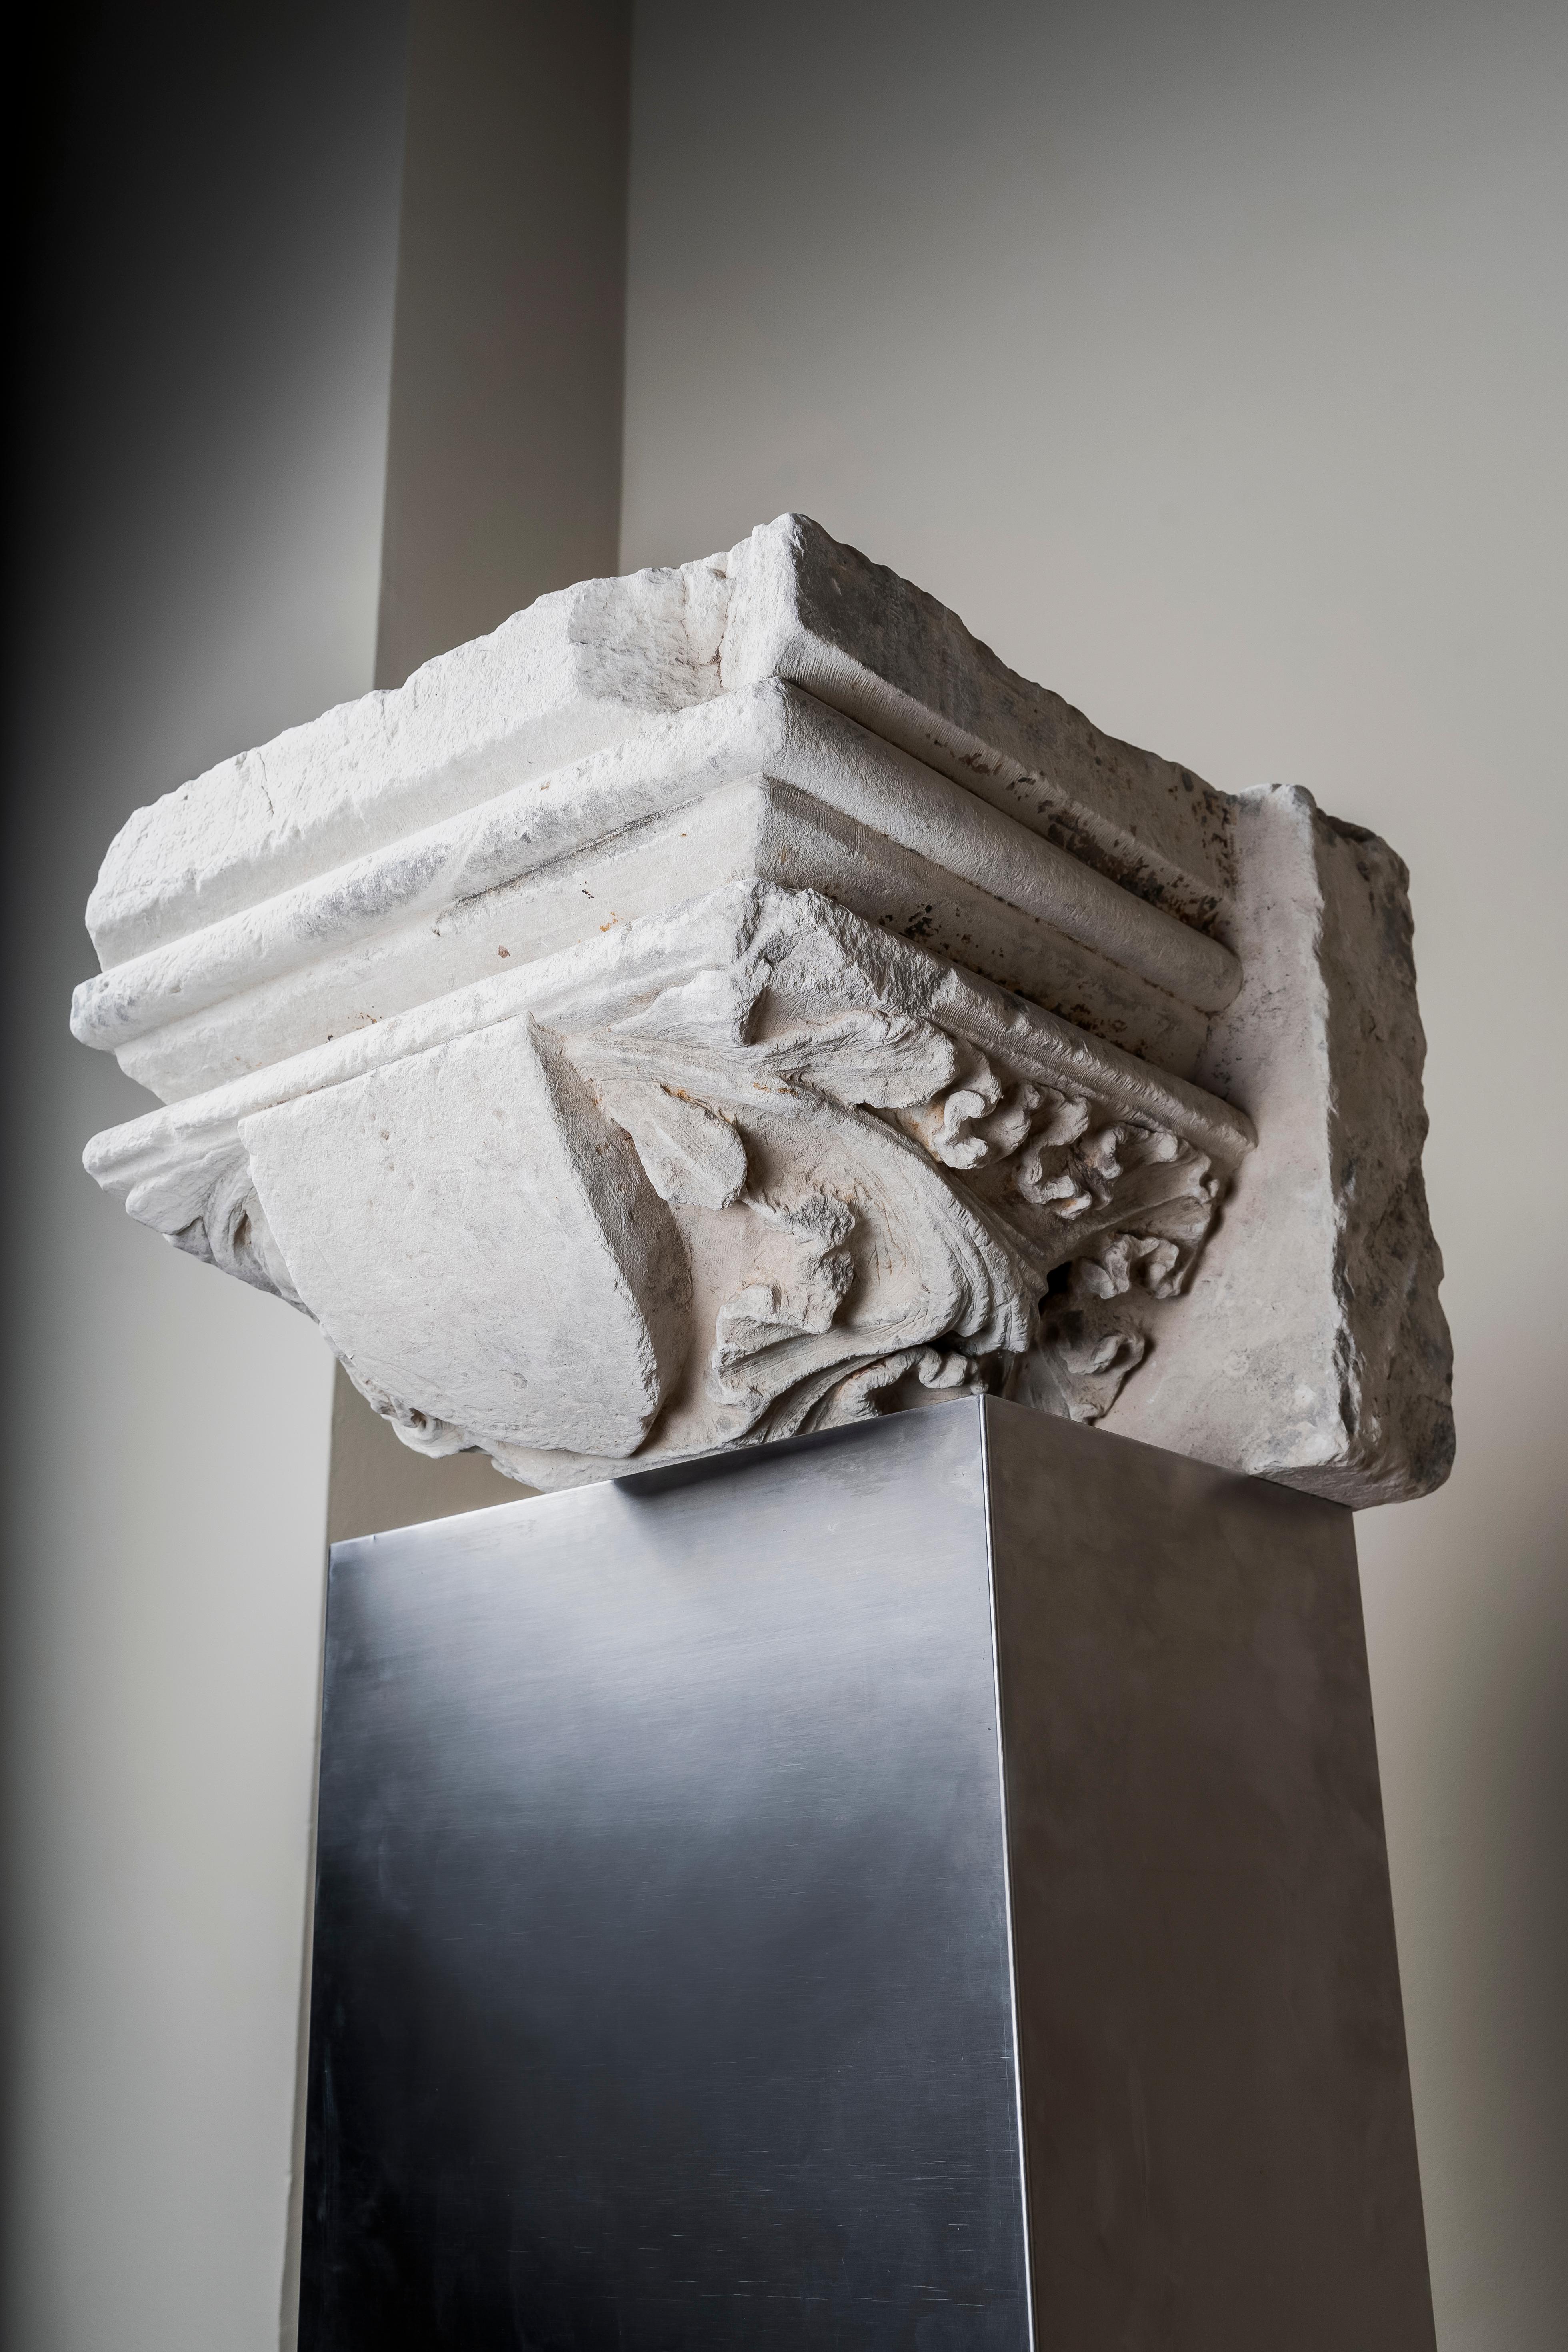 Carved Monumental Stone Capital Decorated with Coat of Arms, France, 15th Century